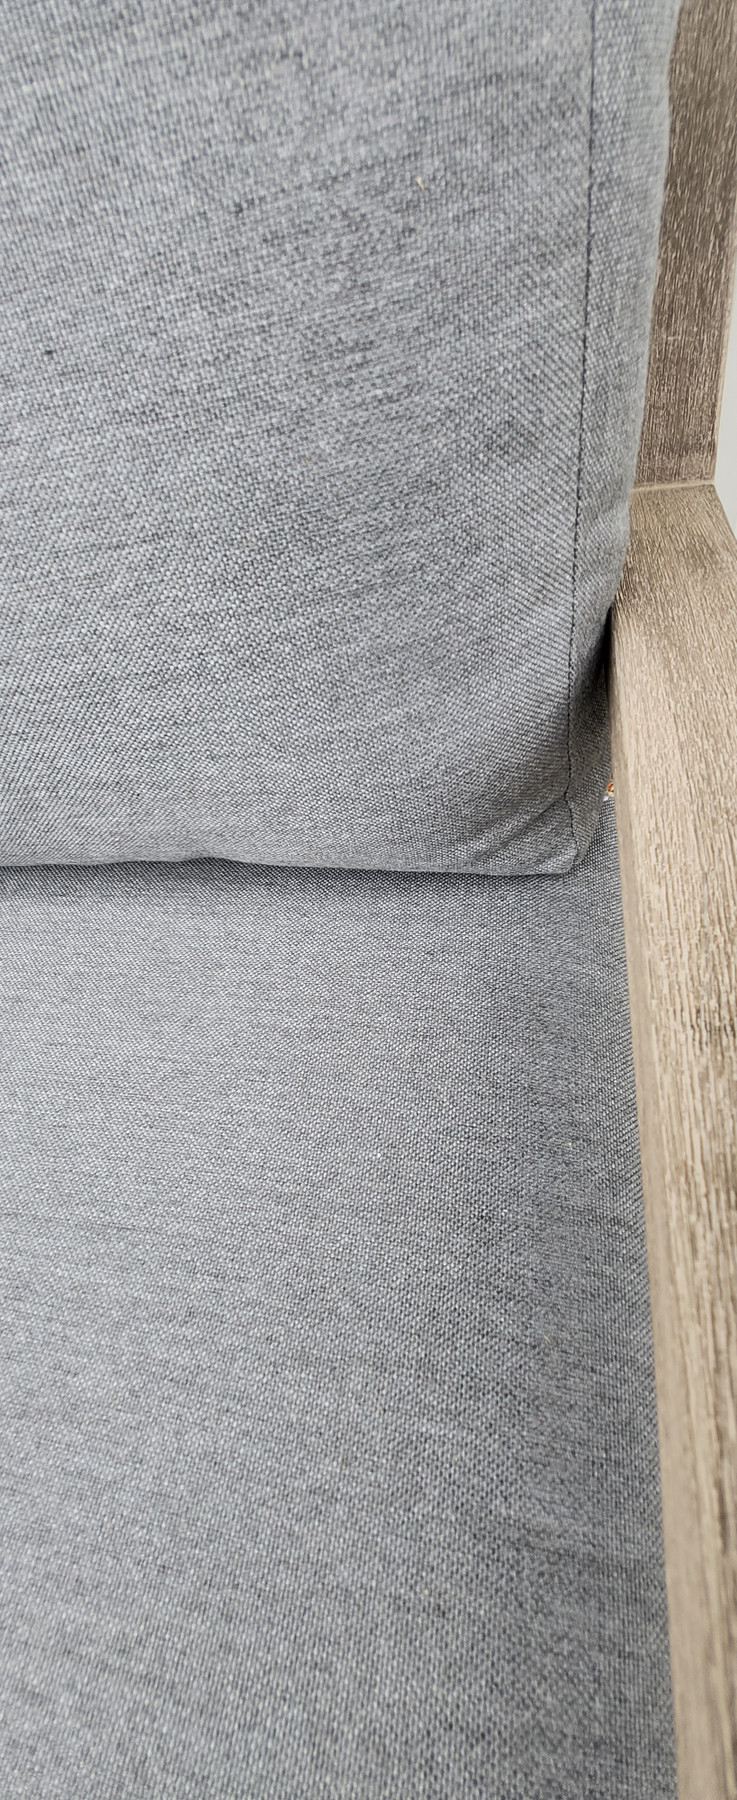 Close up  view of the PLAZA BURMA Low Lounging Arm Chair with SUNBRELLA cushions - the most trusted performance fabric in the world. Cushion inners are made from quick dry foam